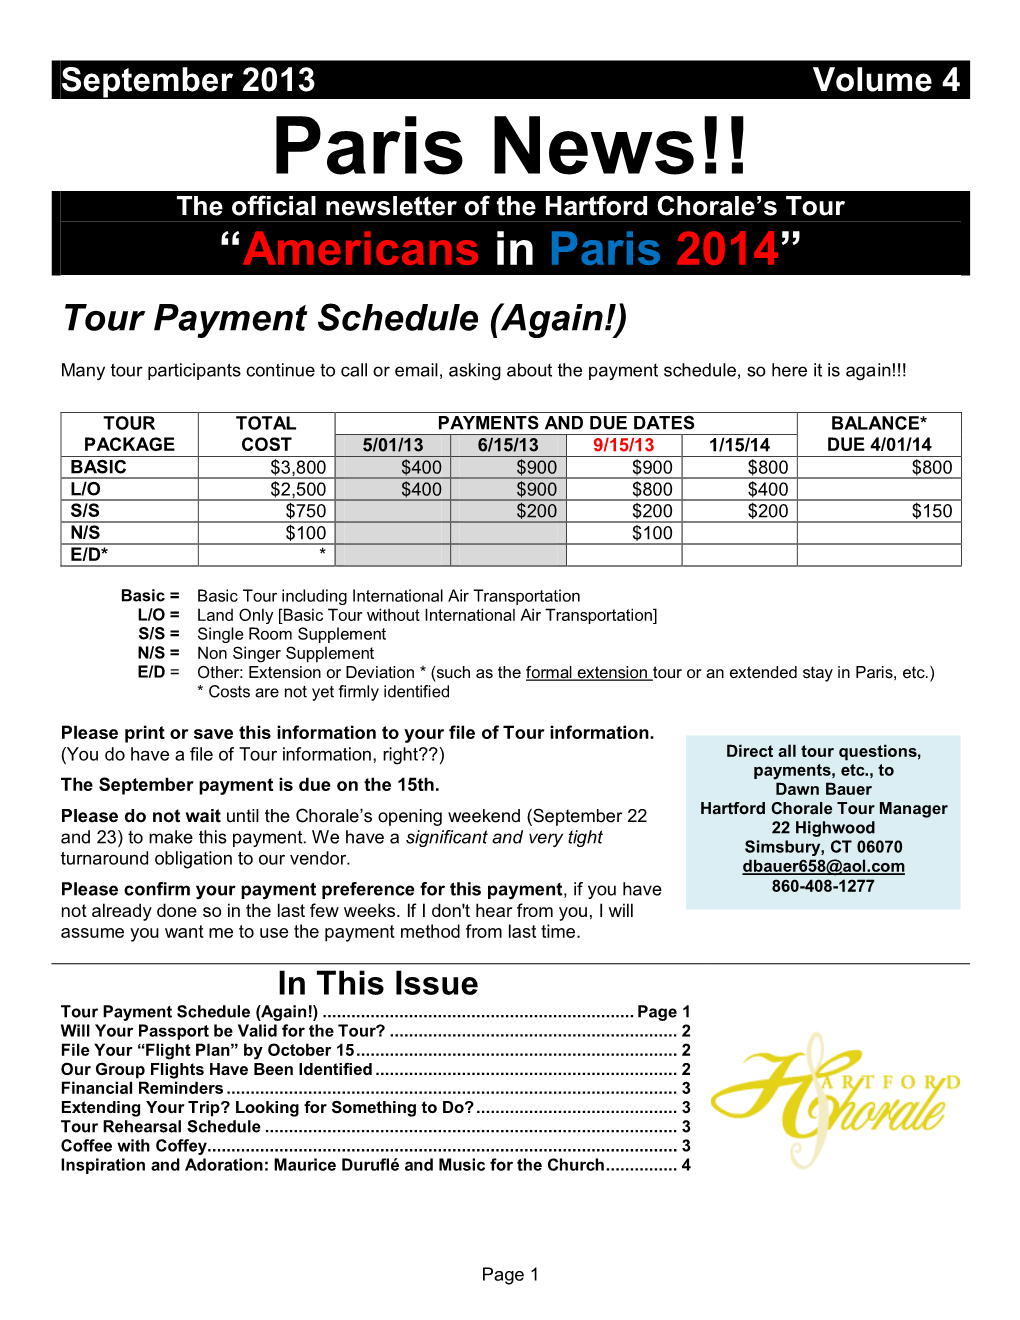 Paris News!! the Official Newsletter of the Hartford Chorale’S Tour “Americans in Paris 2014”